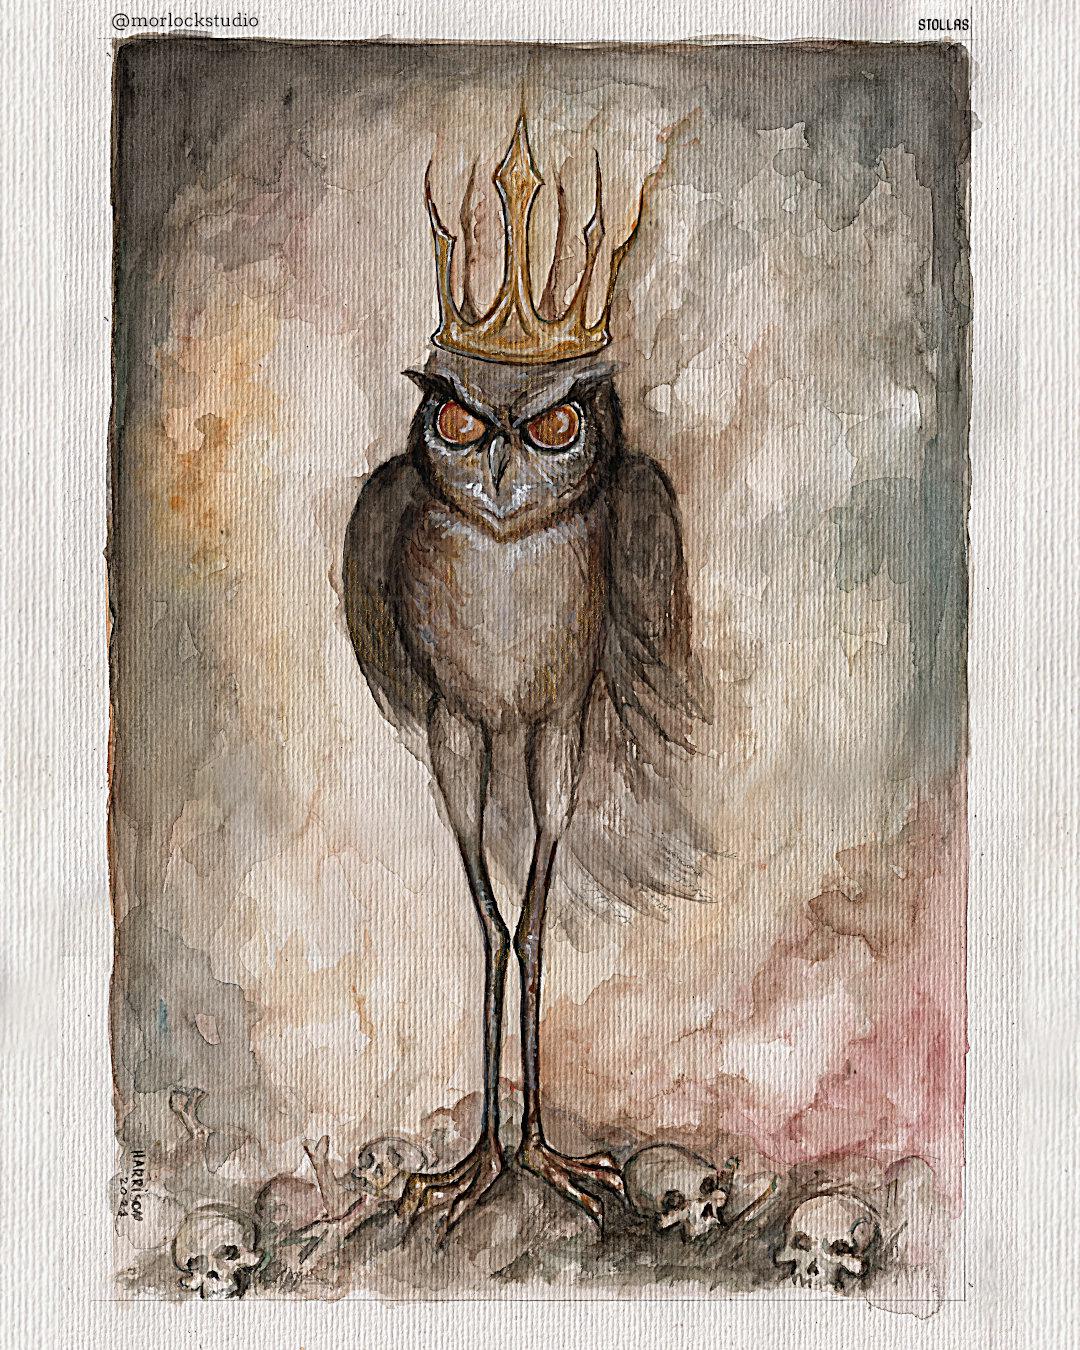 Art executed in watercolor in honor of Stolas, the 36th spirit of Ars Goetia